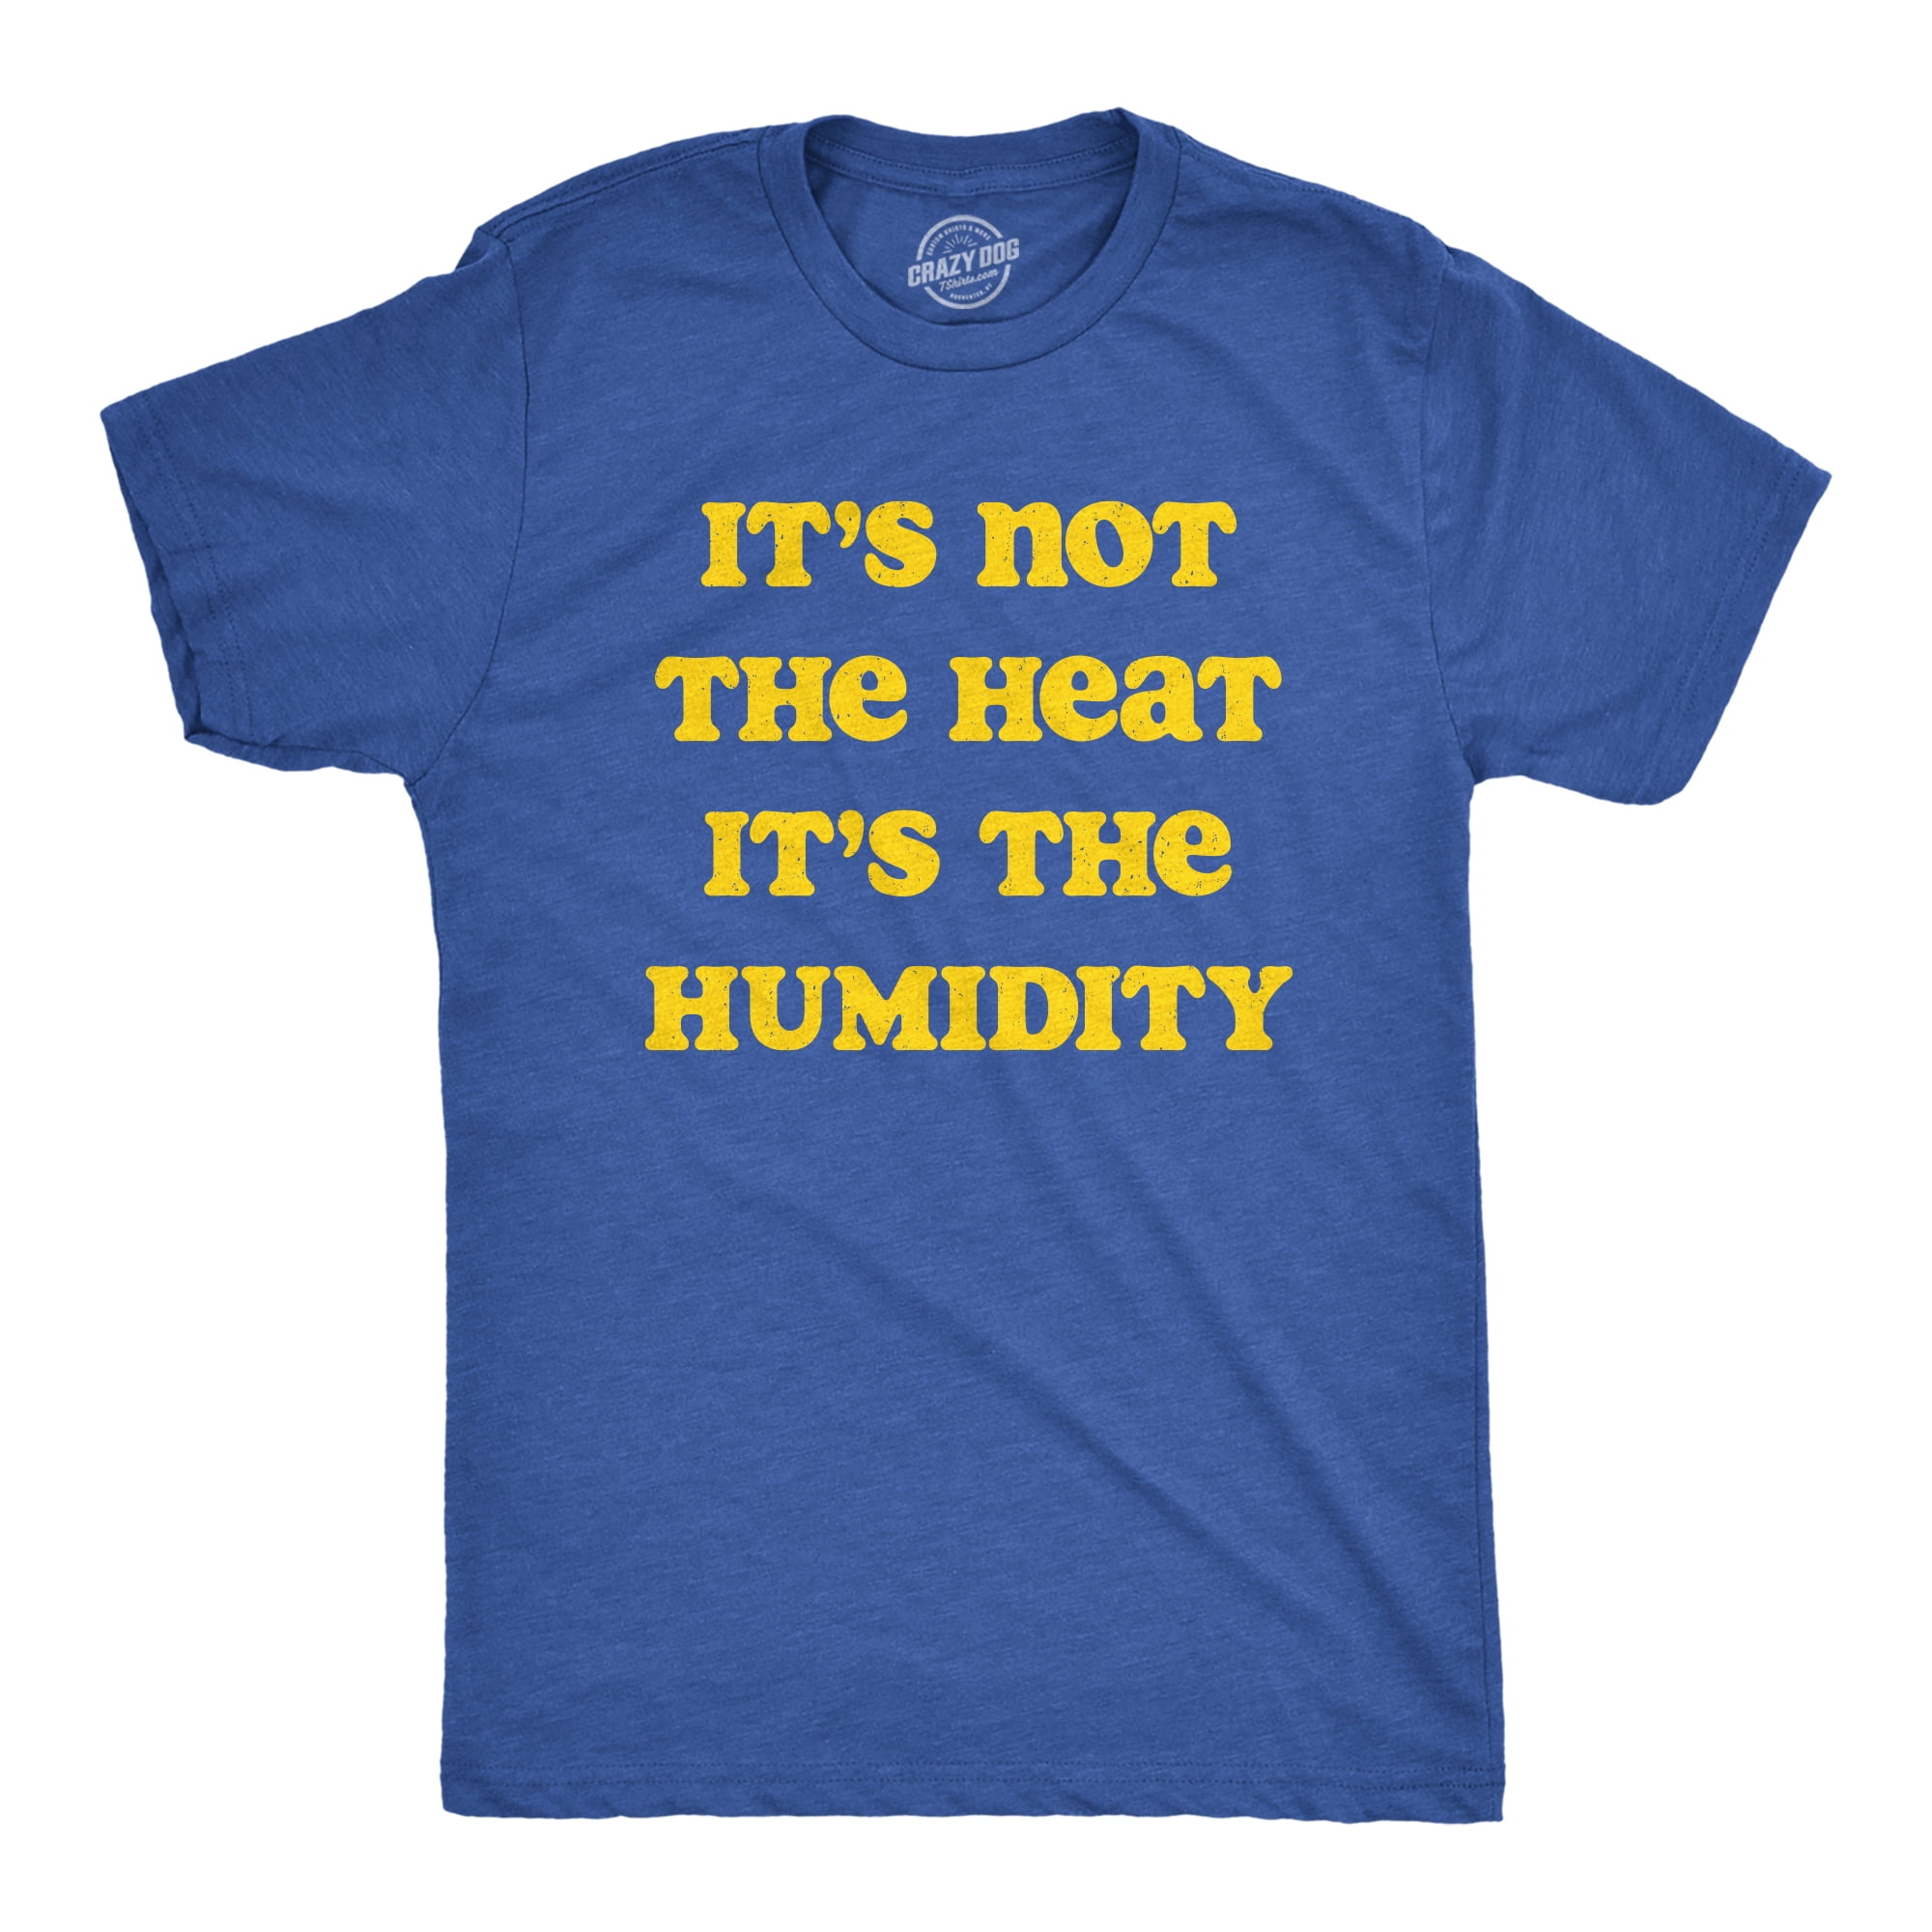 Mens Its Not The Heat Its the Humidity T Shirt Funny Sarcastic Hot Summer  Joke Tee For Guys Graphic Tees 